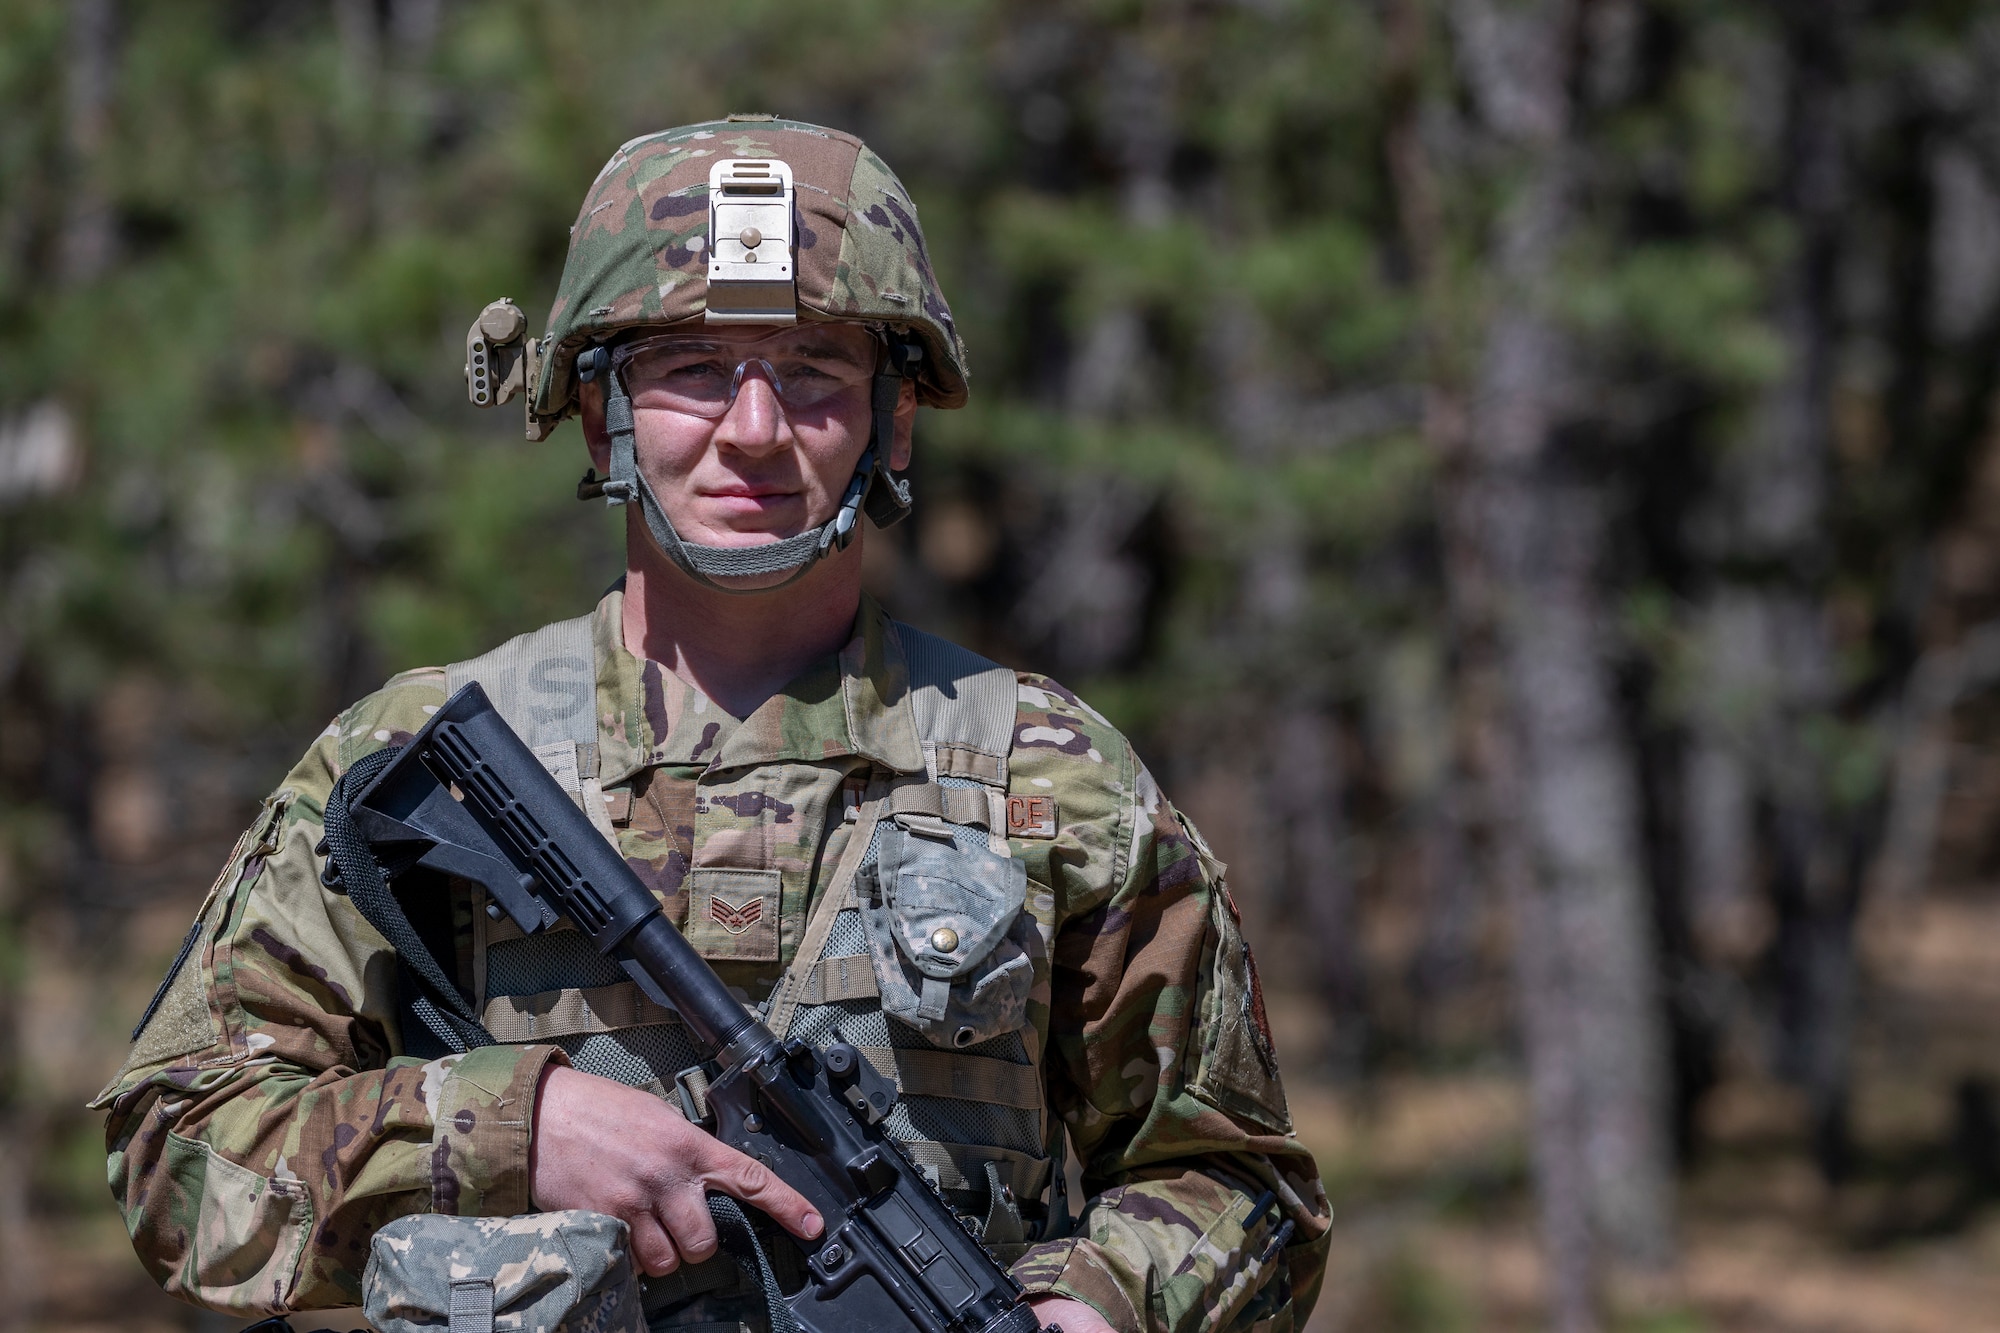 U.S. Air Force Senior Airman Alex Potts stands for a portrait during the New Jersey National Guard's Best Warrior Competition on Joint Base McGuire-Dix-Lakehurst, New Jersey, April 20, 2022. Potts is a survey team member with the 21st Weapons of Mass Destruction-Civil Support Team.